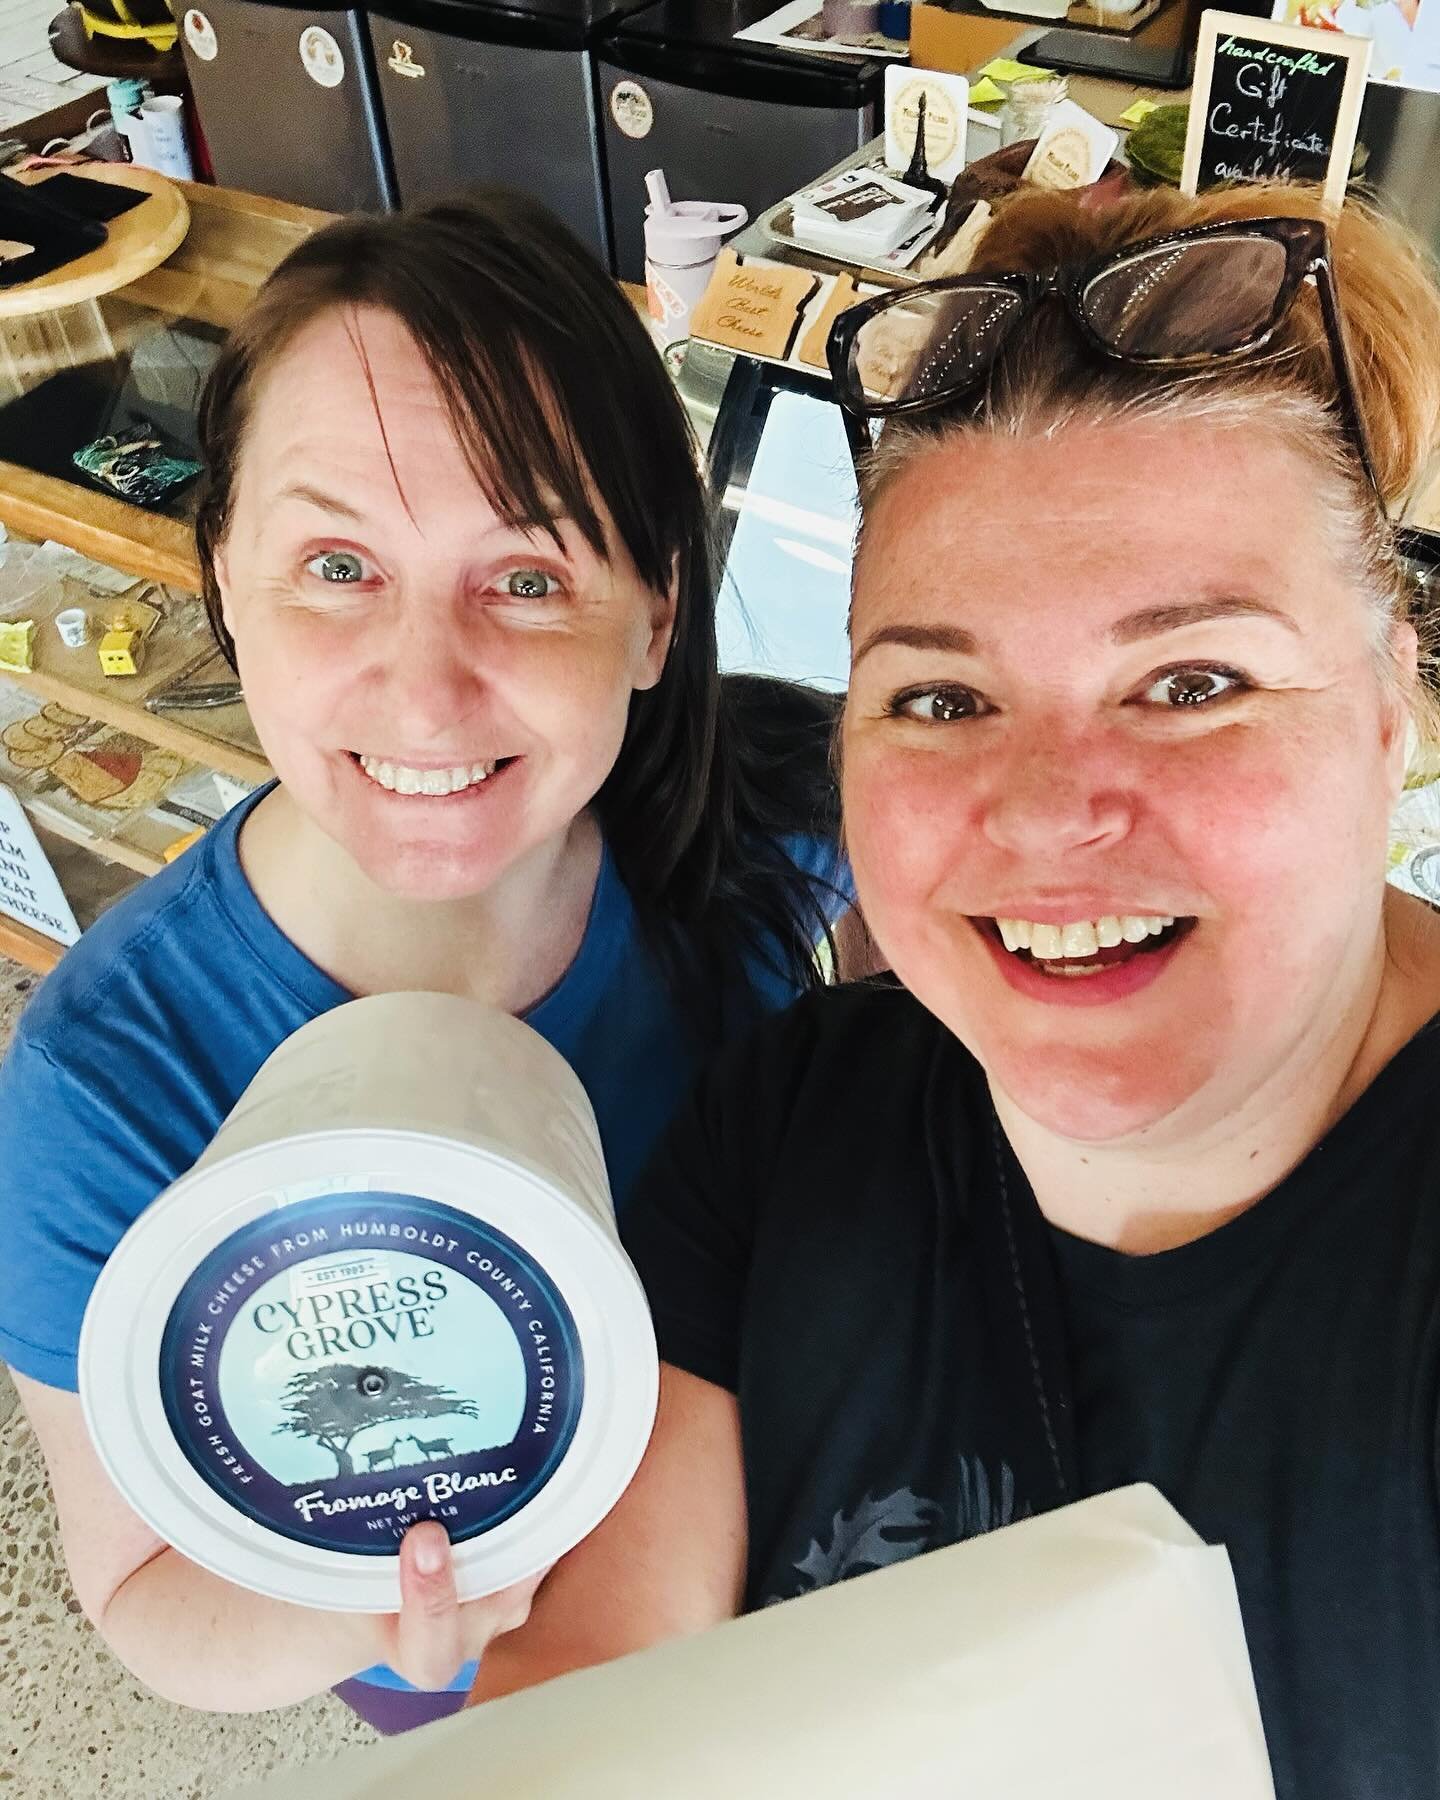 CHEESE RICH,  BITCHES! 
So excited and HAPPY to work with @oregoncheesecave to bring you new,  DELICIOUS CHEESE on the new menu, COMING SOON!!! #oregoncheesecave #goatcheese #progoat #parmisanoreggiano #summervibes #happycheese #happyluncheonette